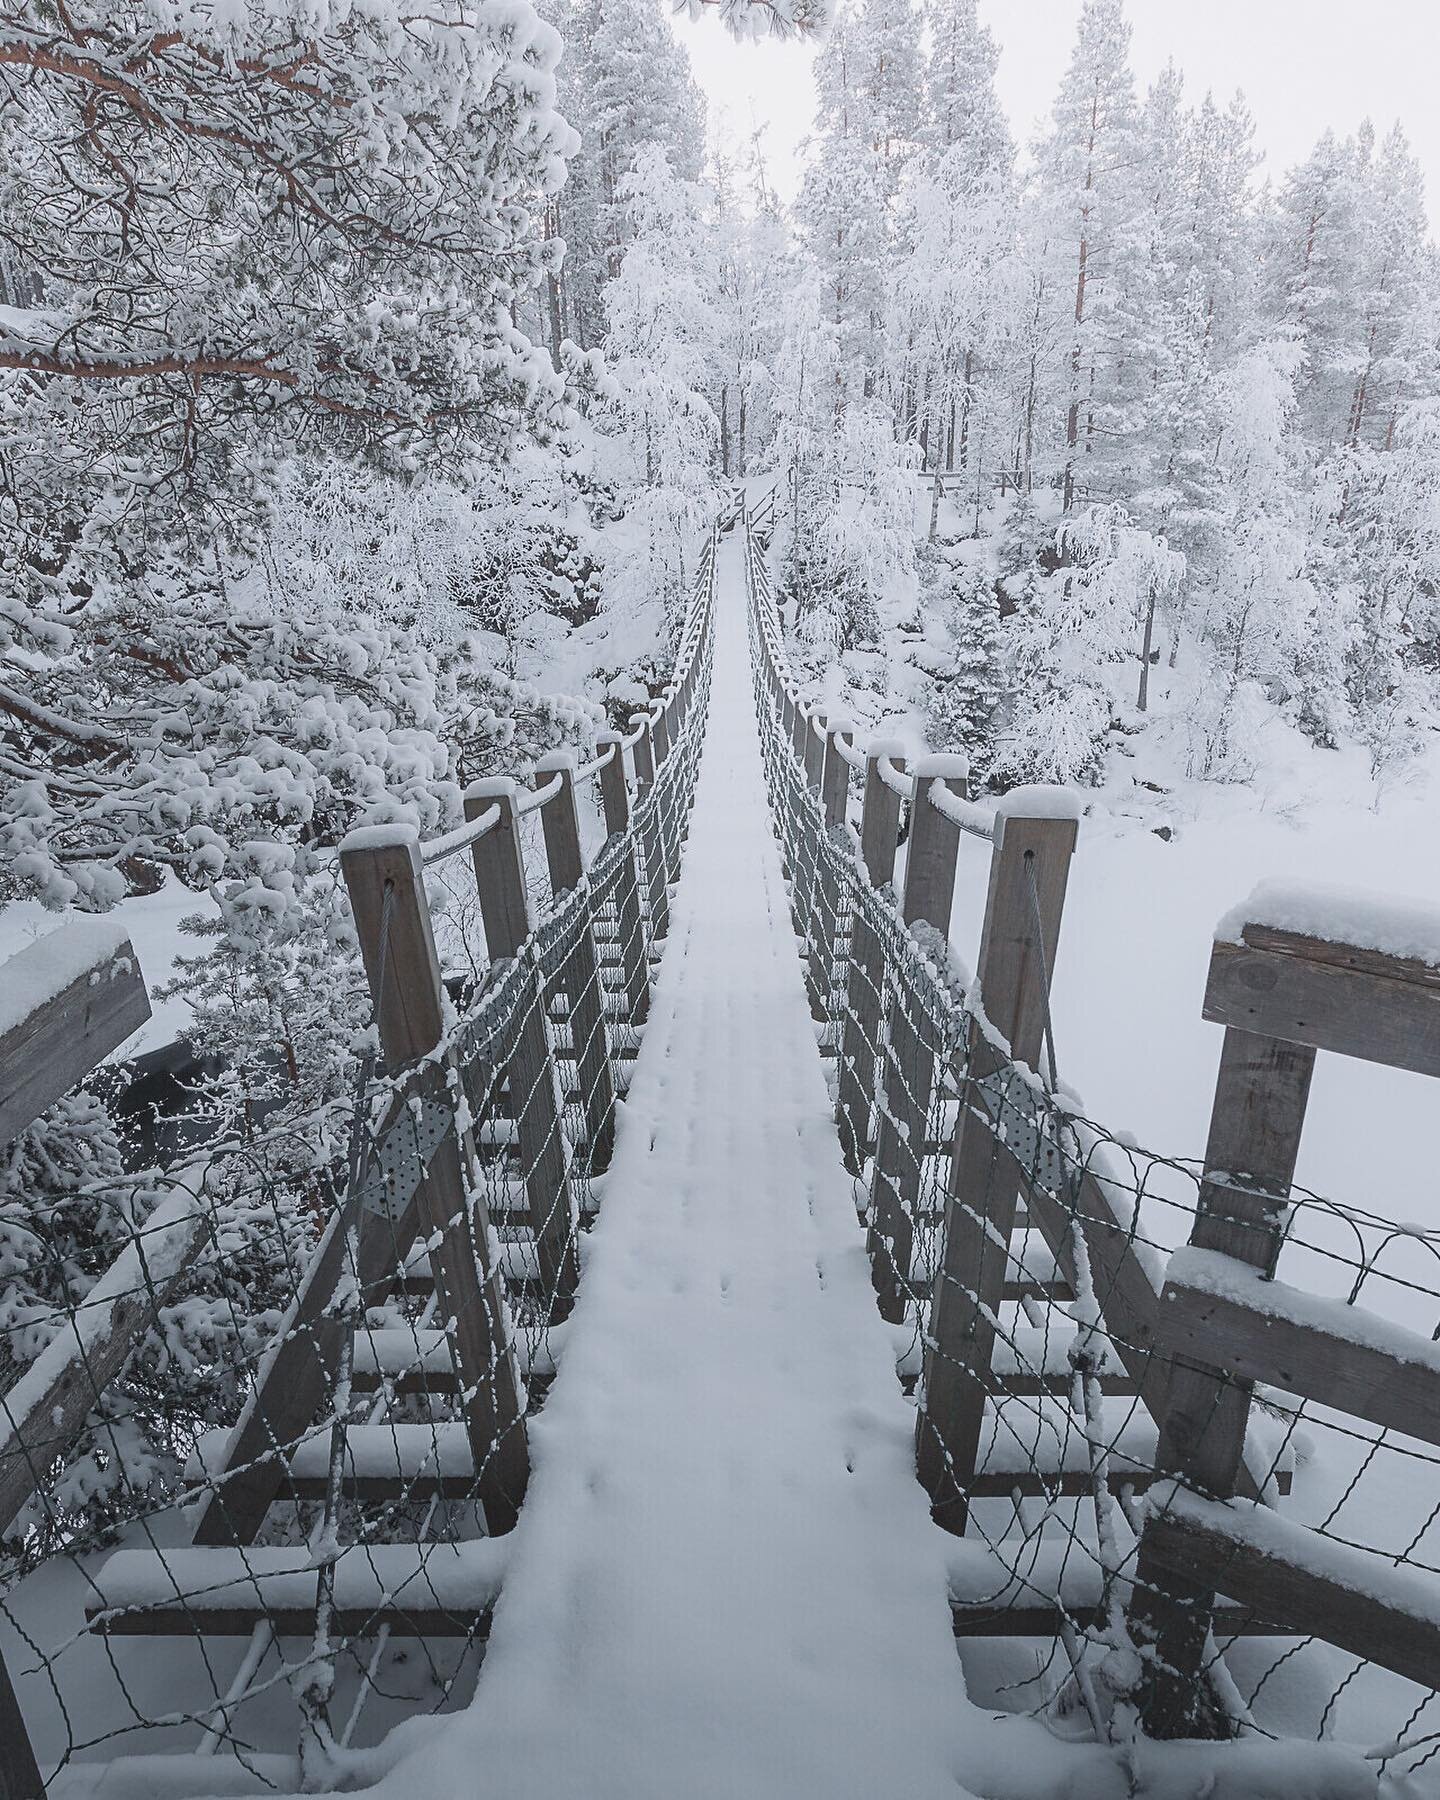 Still remember winter? Trekking across Kuusamo region in Finland, exploring the suspended bridges and wild rapids in minus 30 degrees celsius sure is a blast.

It&rsquo;s still nice the summer is coming though 😆